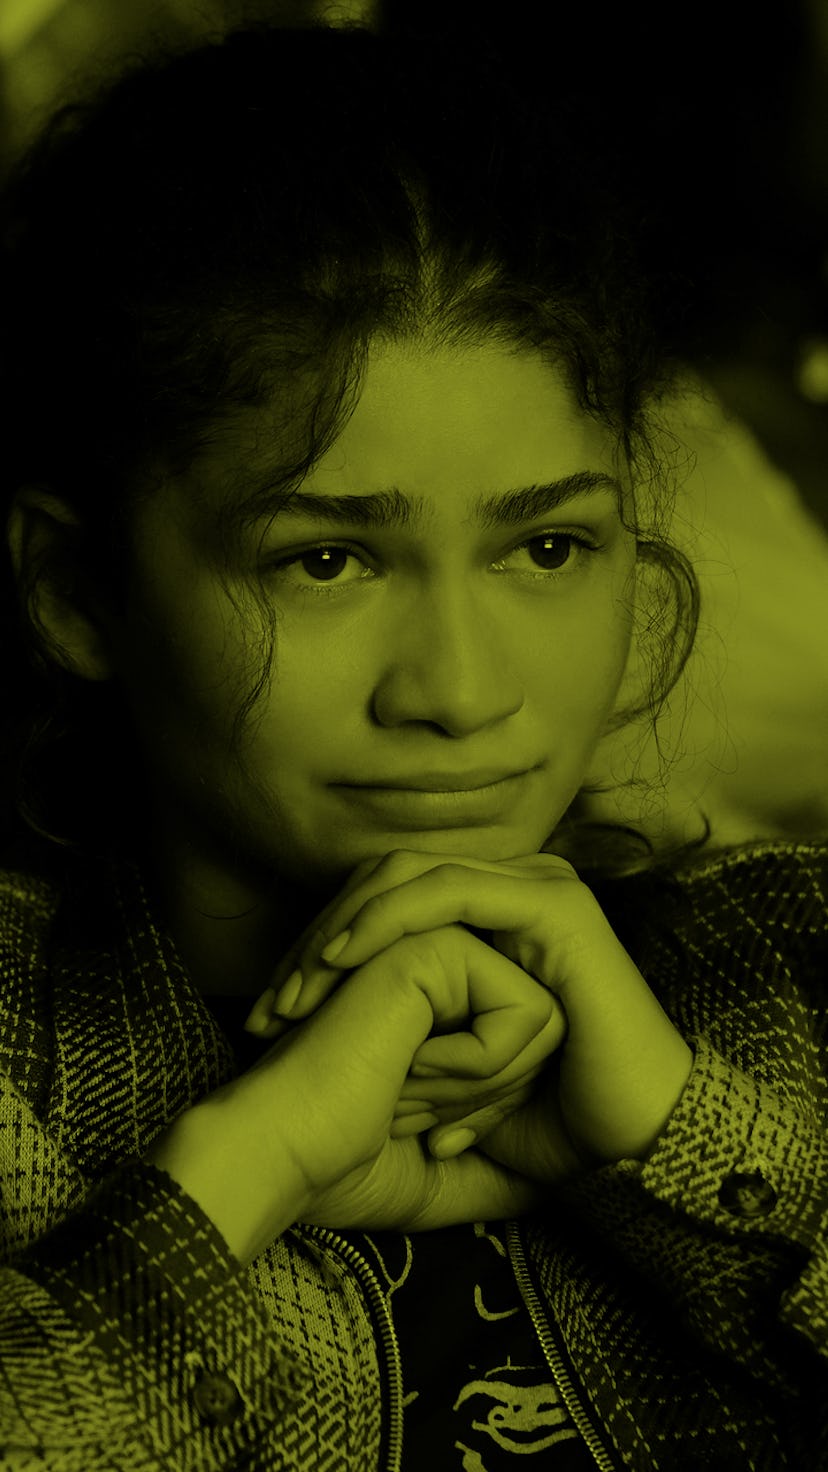 Zendaya, from "Euphoria", sitting down with hands under her chin, looking like she is close to tears...